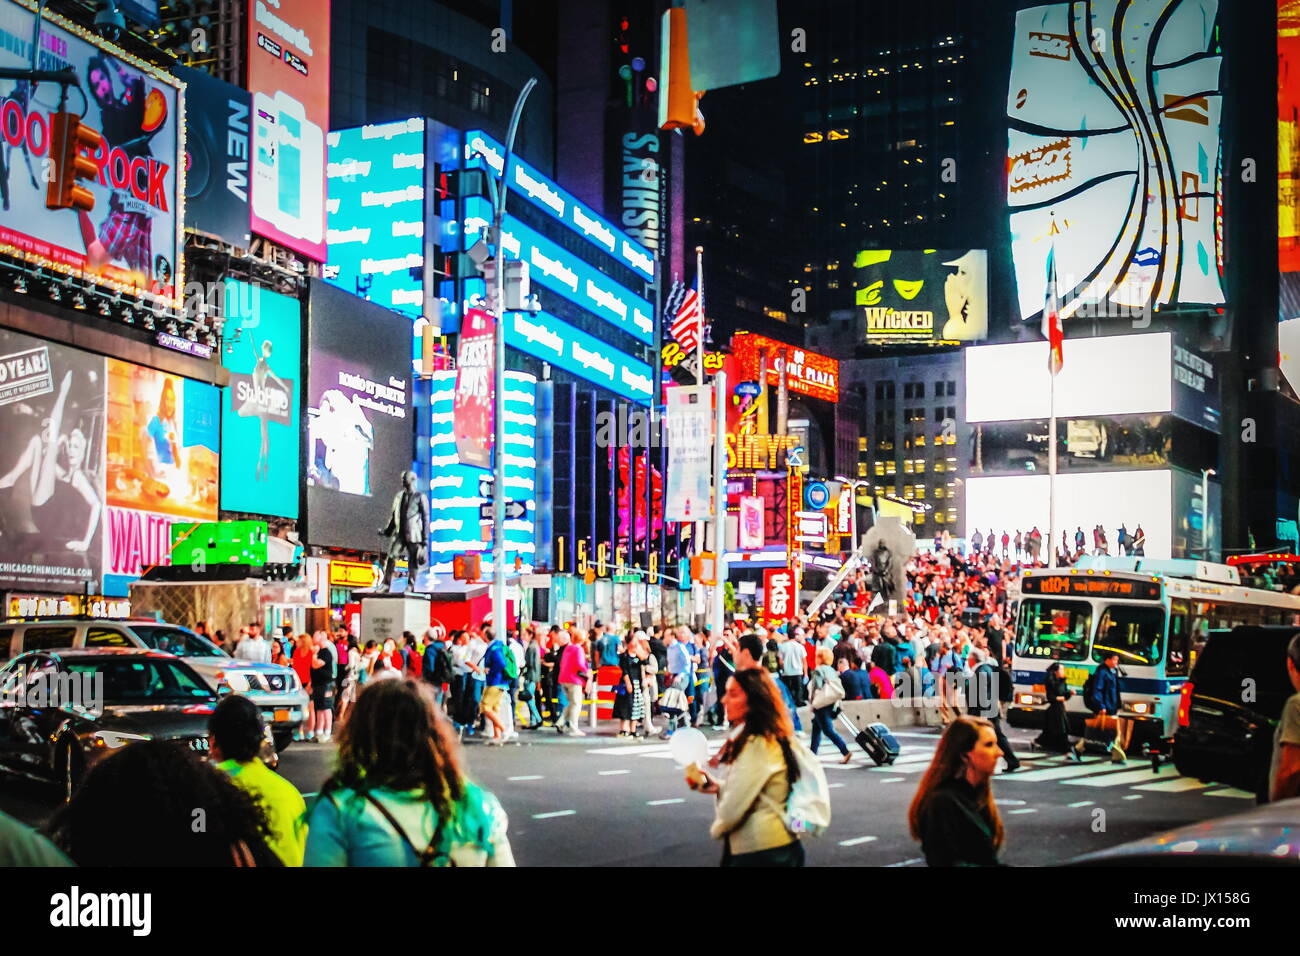 New York, USA - 26 September 2016: Massive advertising Billboards tower above traffic and pedestrians at the intersection between Times Square and Bro Stock Photo